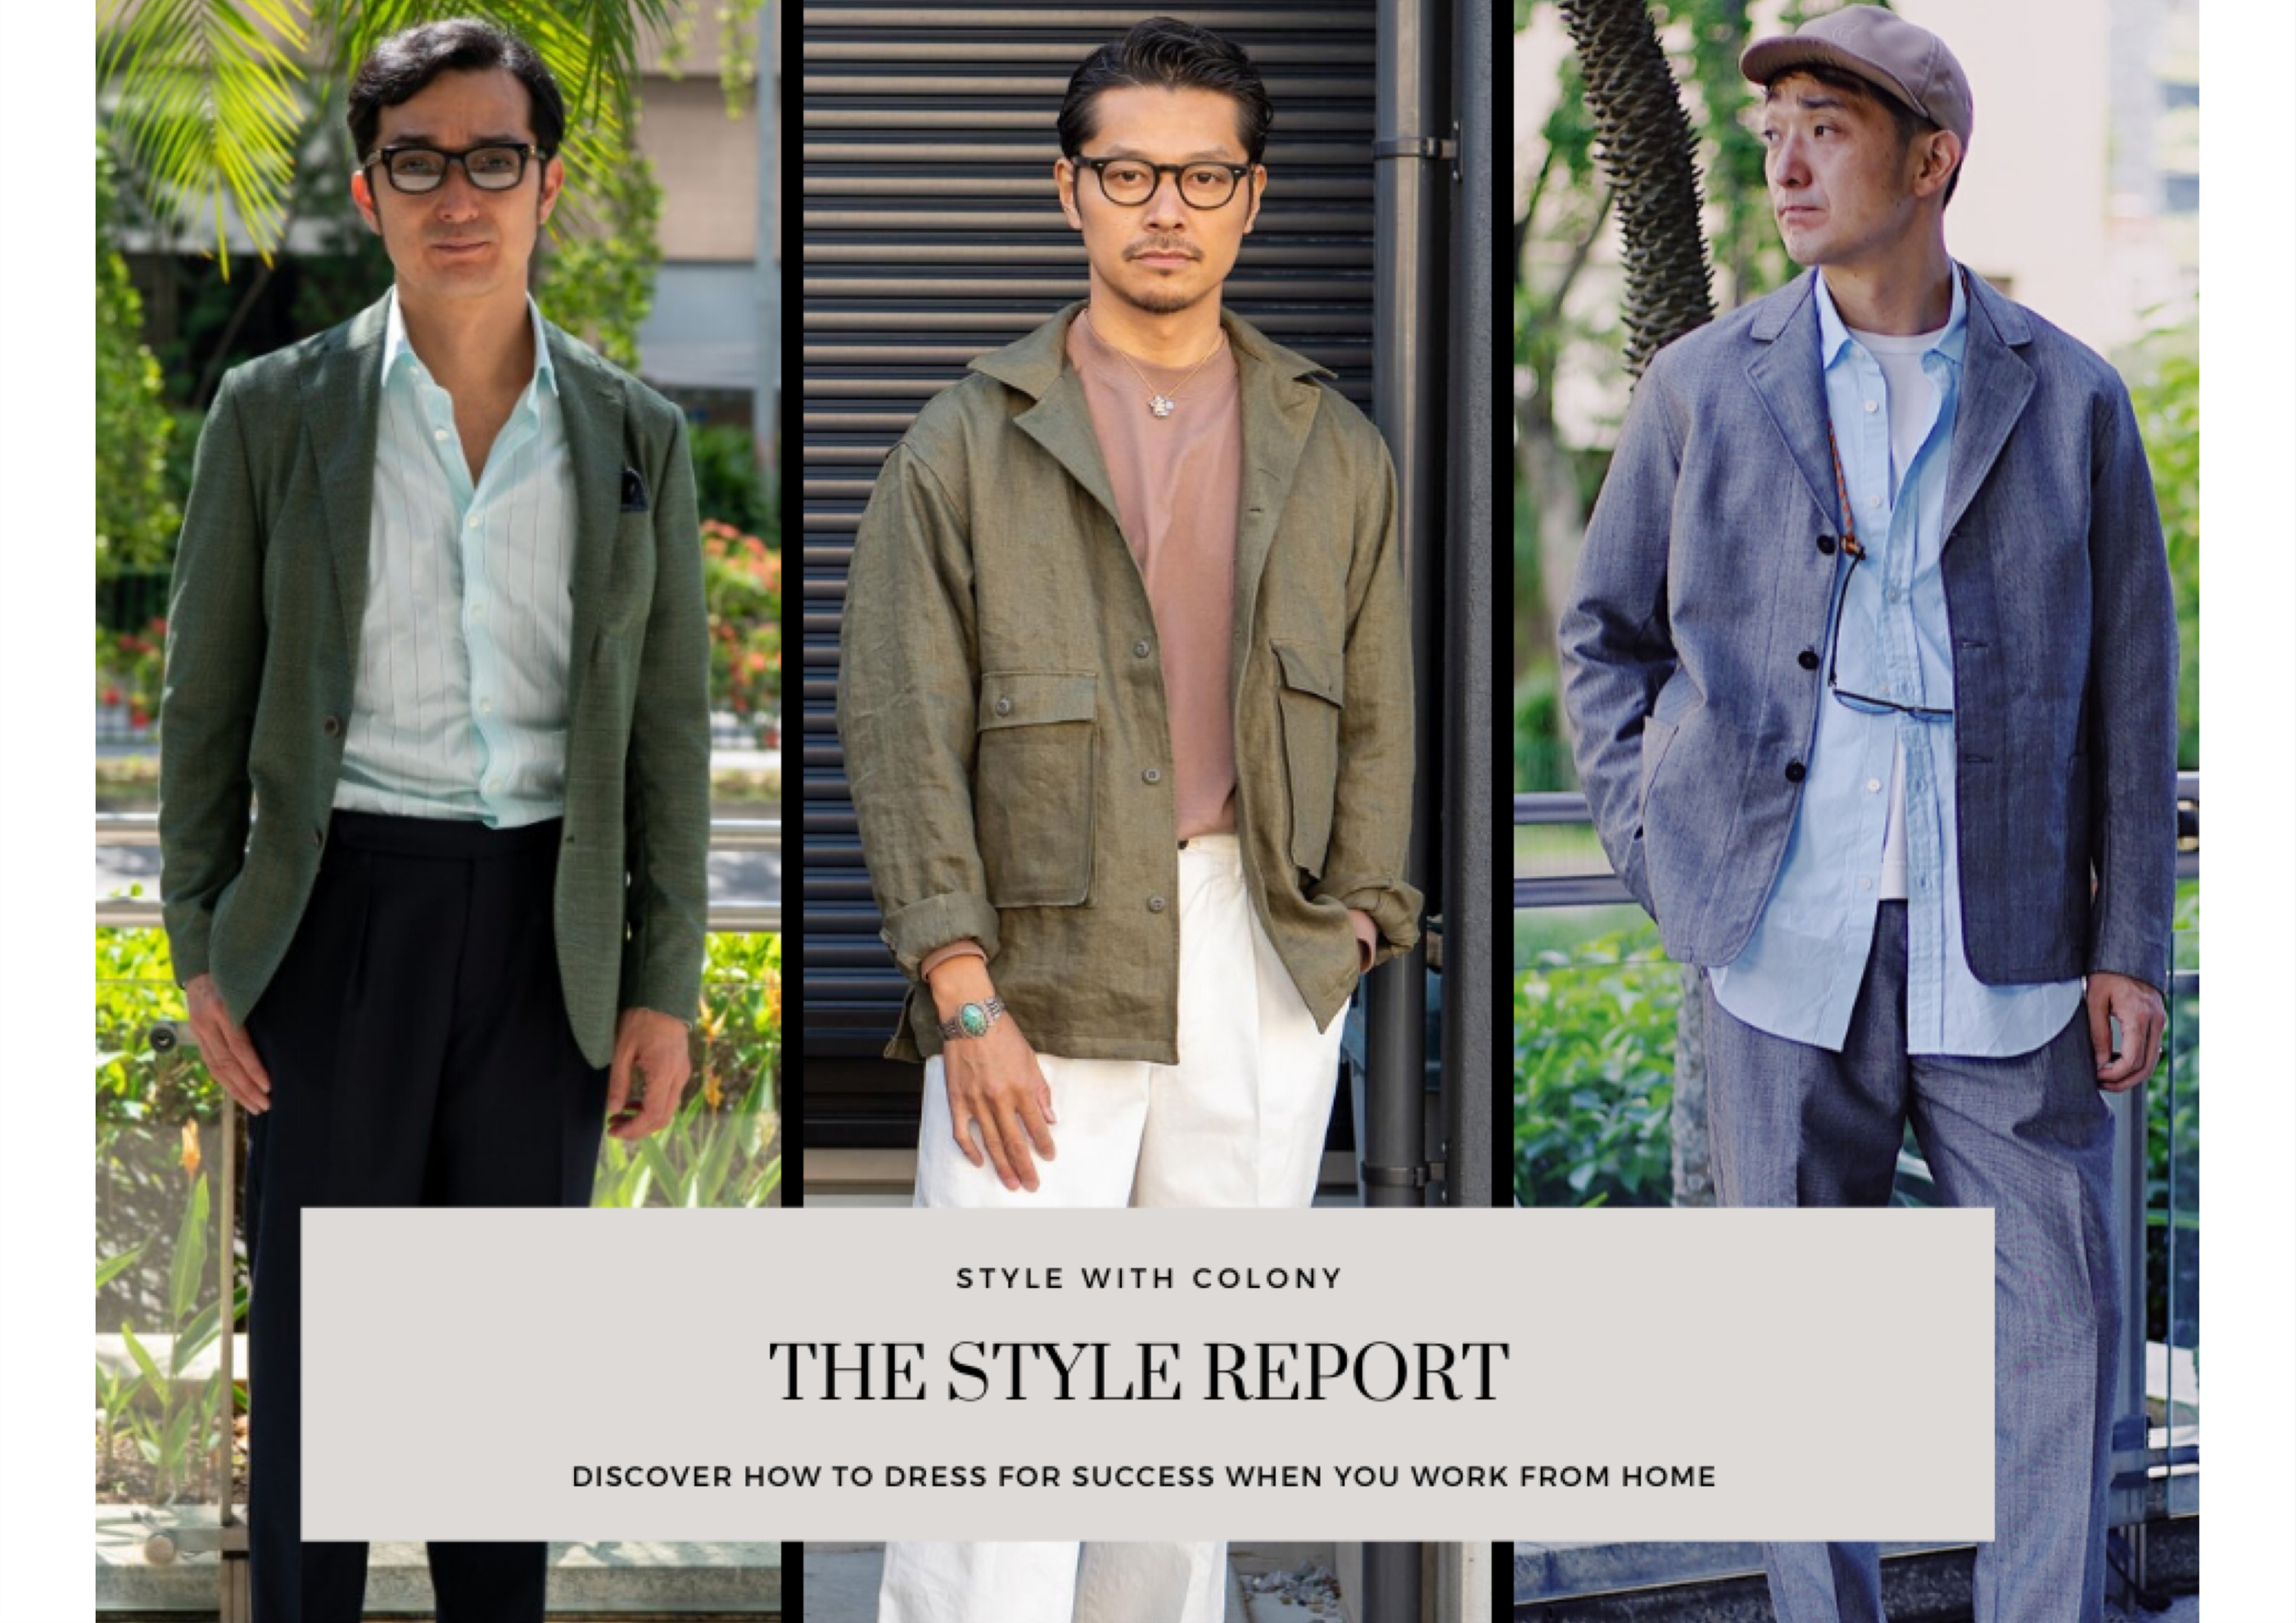 The Style Report : Dress for Success at Home